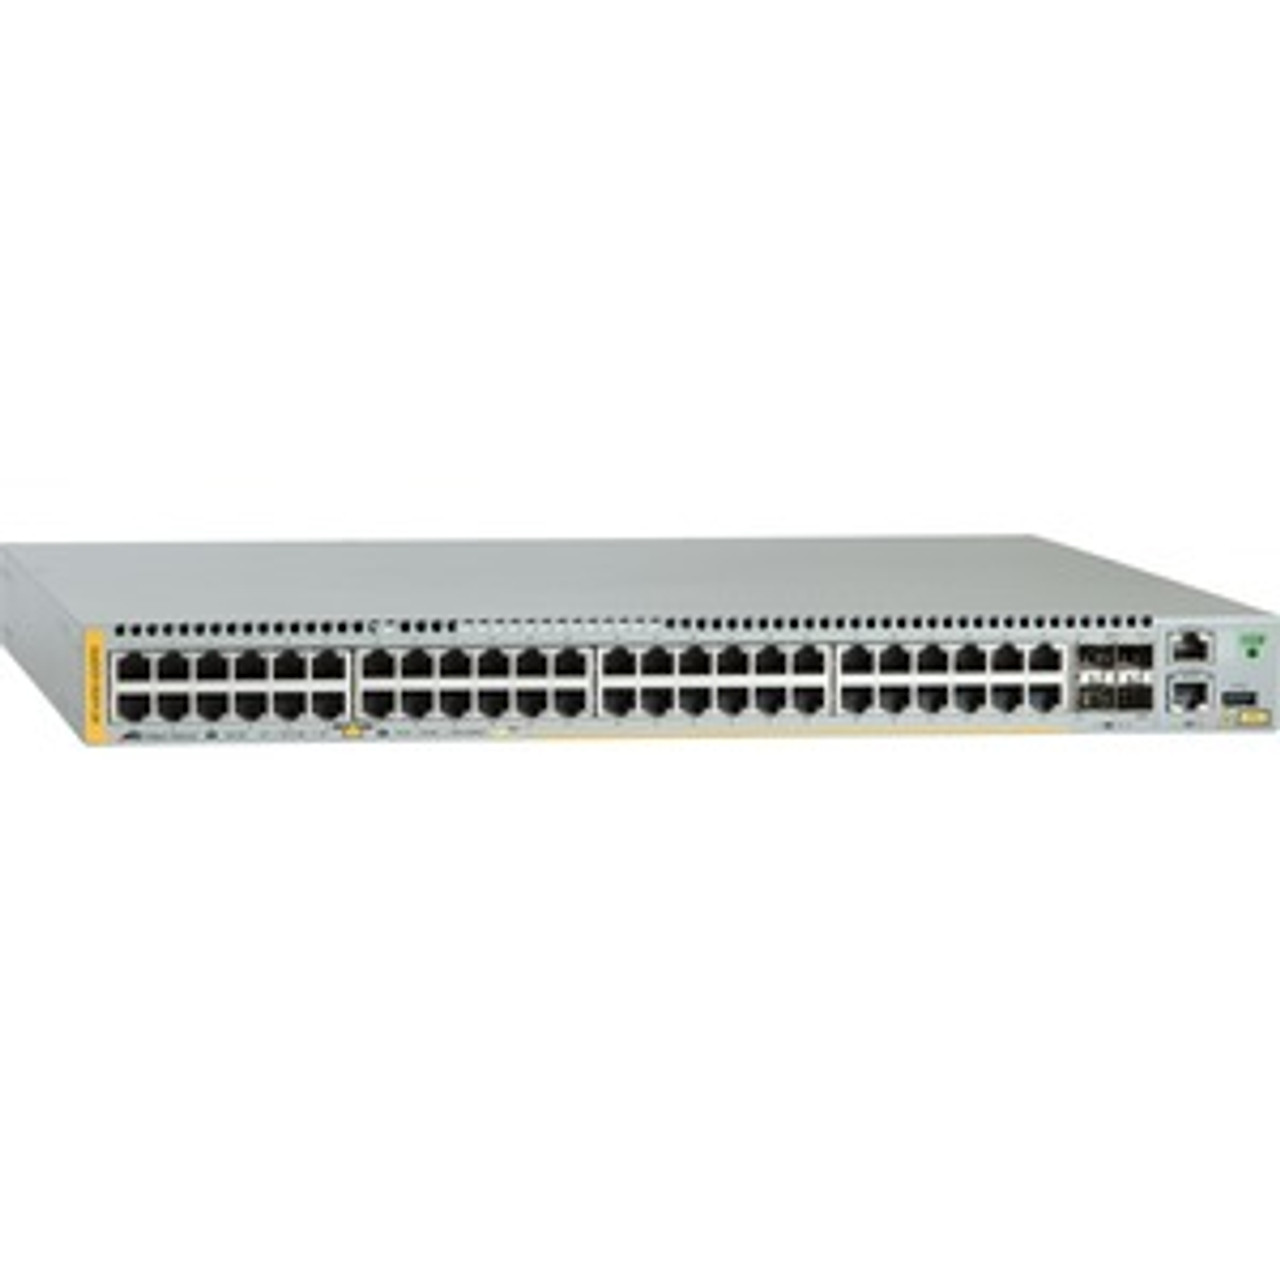 AT-X930-52GPX Allied Telesis x930-52GPX Layer 3 Switch - 48 Ports - Manageable - 3 Layer Supported - Modular - Optical Fiber, Twisted Pair -  (Refurbished)